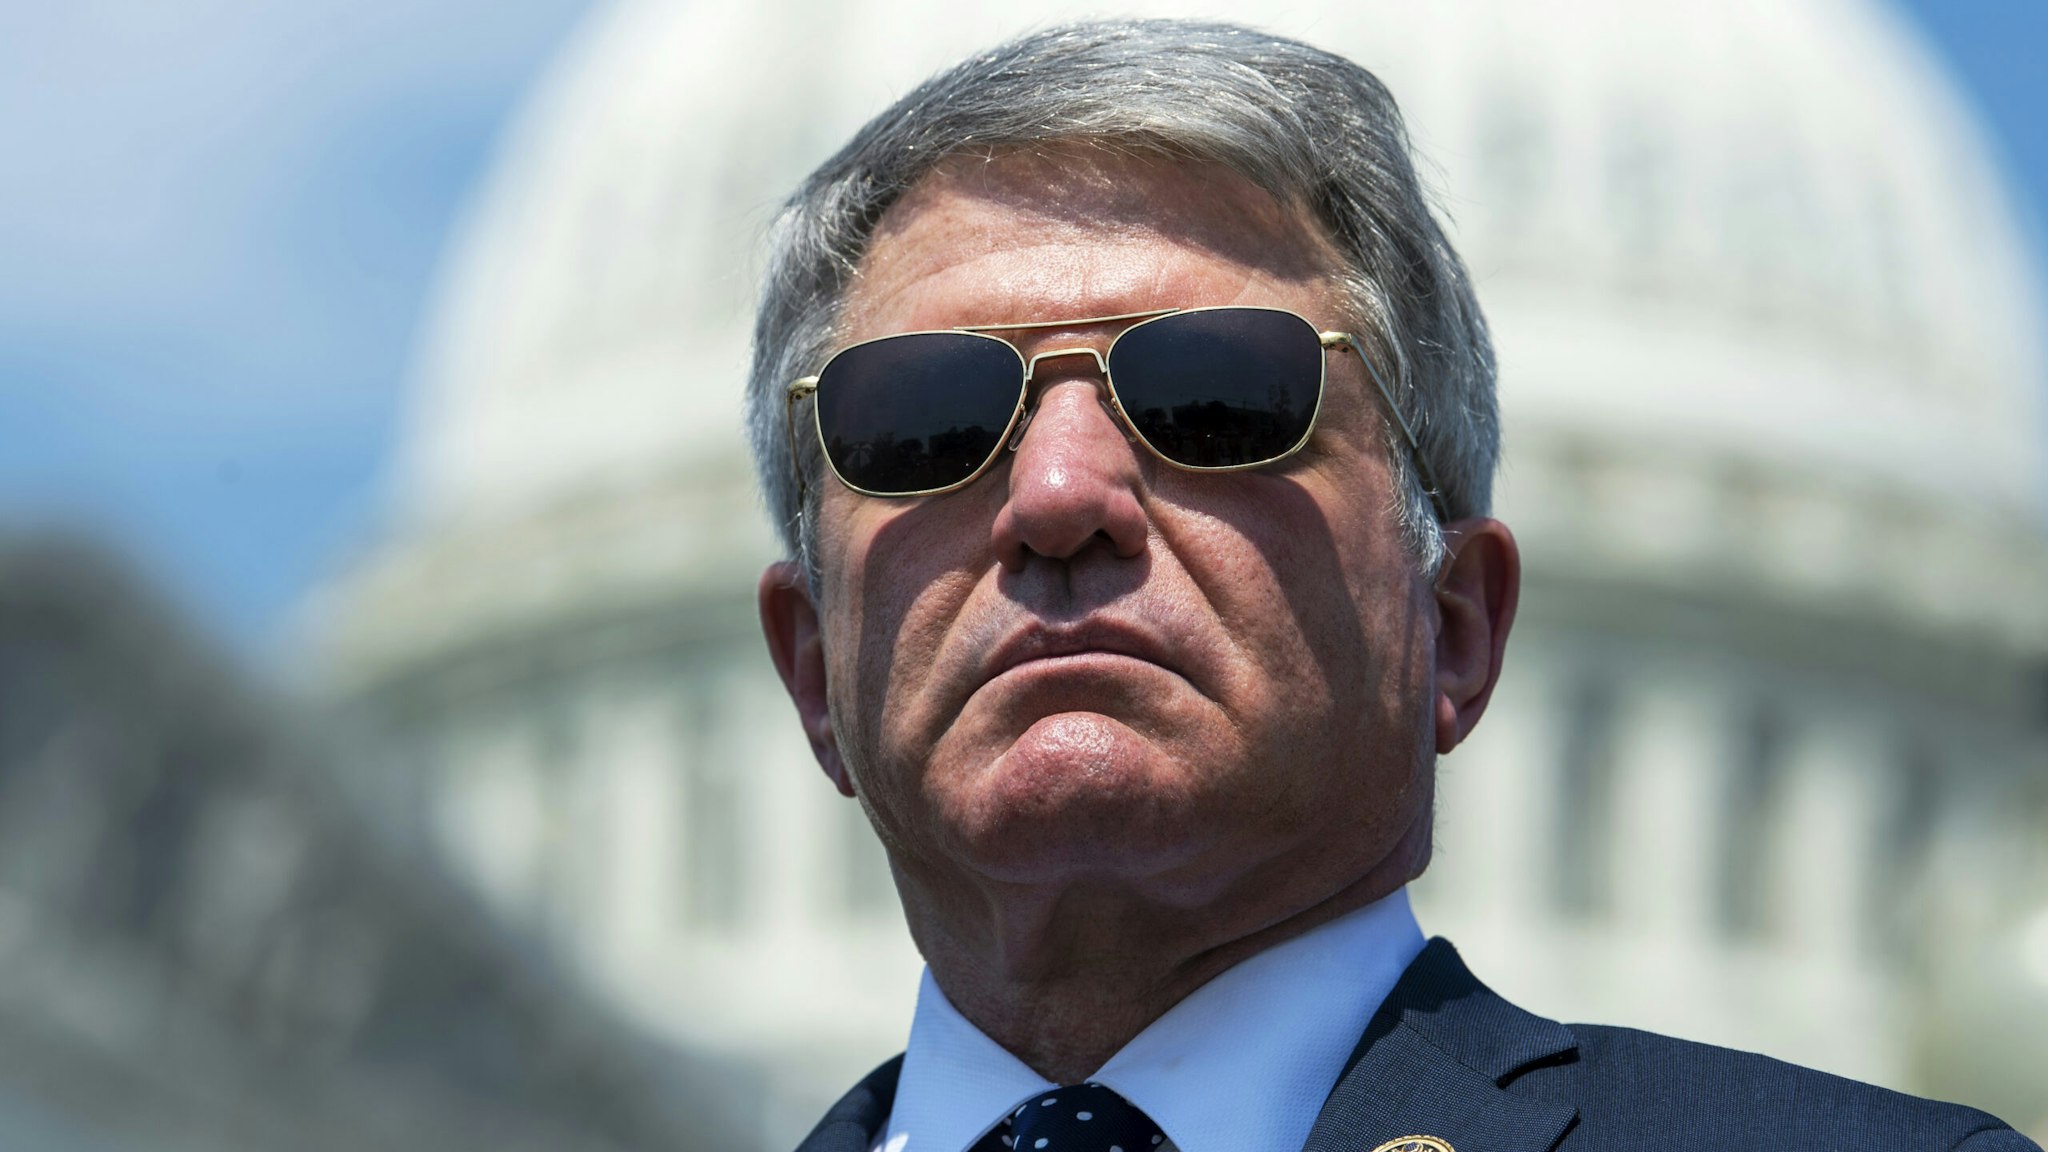 UNITED STATES - AUGUST 25: Rep. Michael McCaul, R-Texas, conducts a news conference outside the U.S. Capitol to call on President Biden to publicly commit to continue evacuating people from Afghanistan until all Americans and all special immigrant visas (SIV) applicants have been safely evacuated, on Wednesday, August 25, 2021.